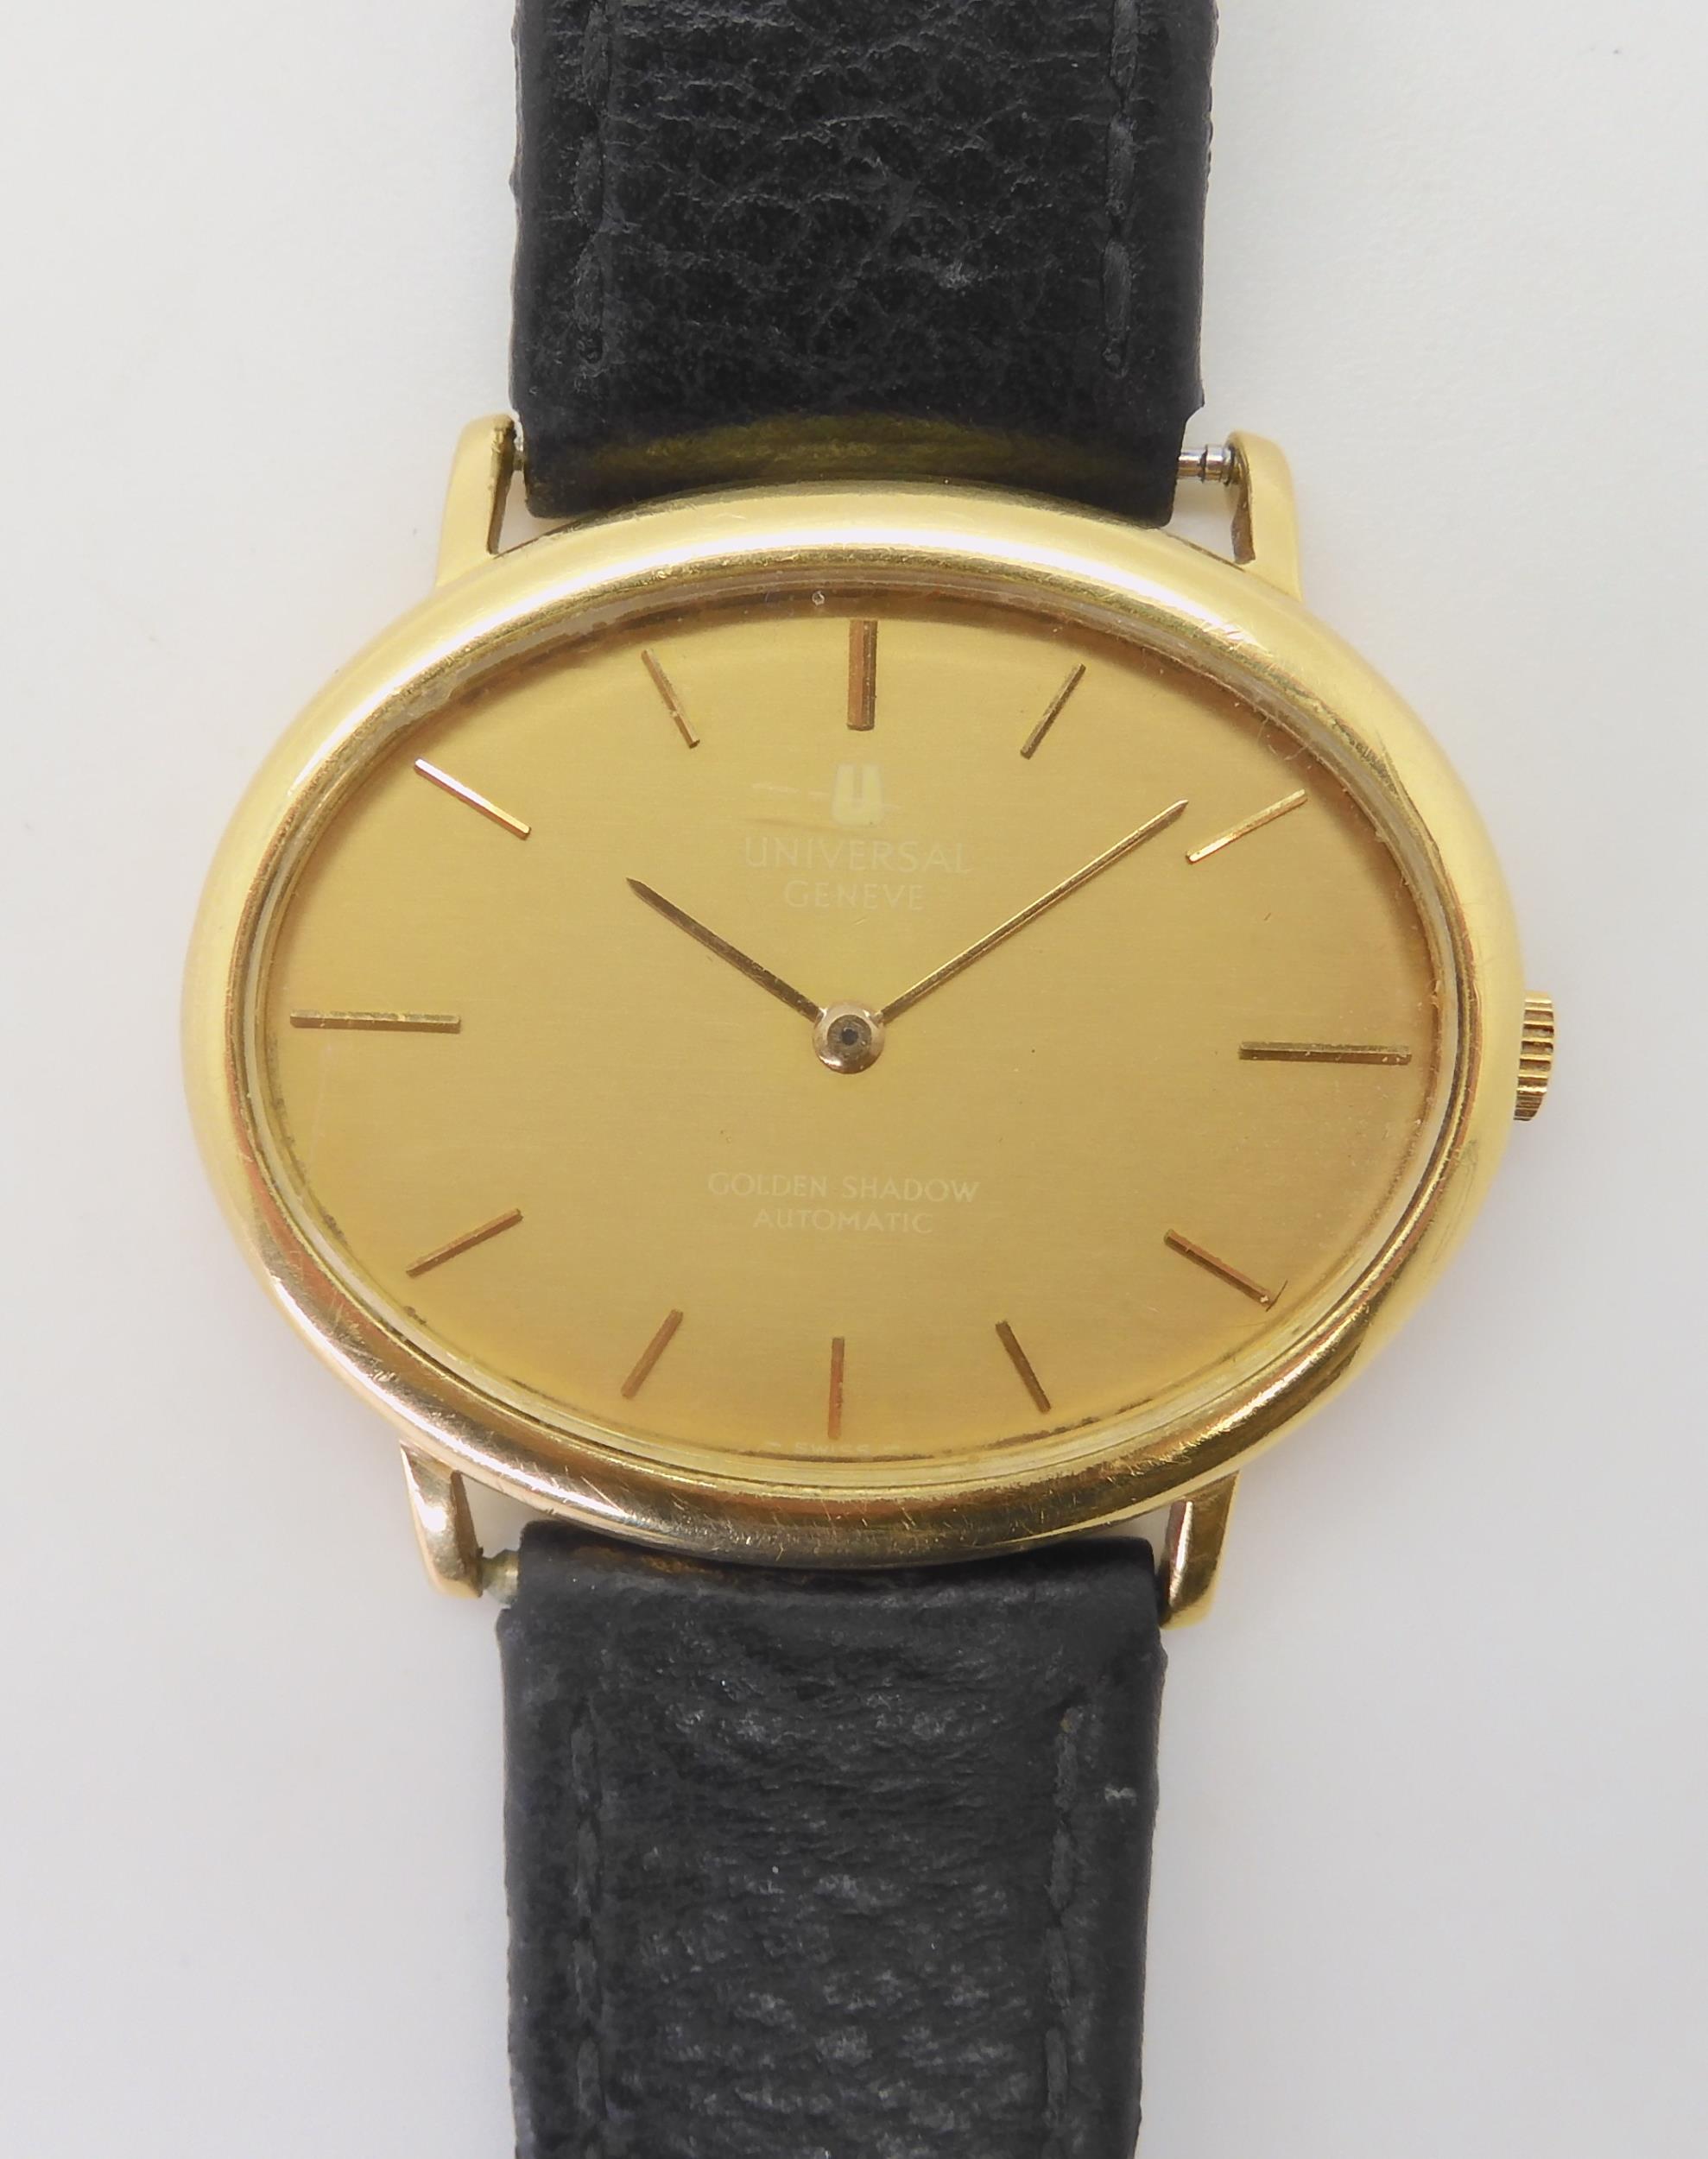 A UNIVERSAL GENEVE GOLDEN SHADOW  with an automatic movement, the case in 18ct gold with Swiss